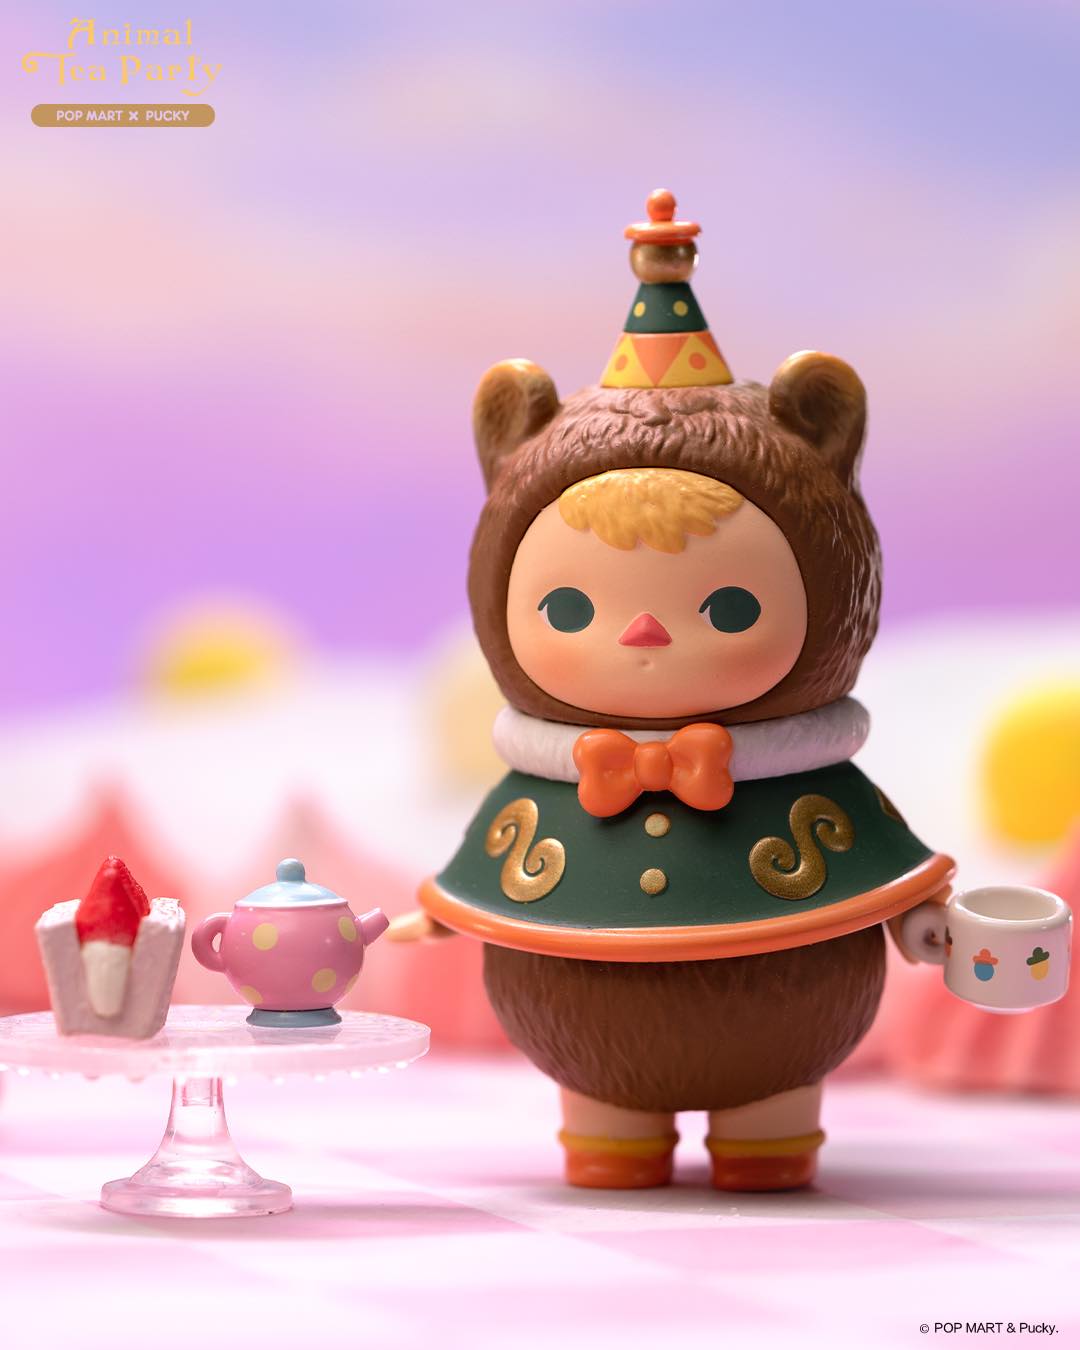 Toy figurine of a bear with teapot, cup, child, bow tie, and more from Pucky Animal Tea Party Blind Box Series by Pucky x Pop Mart.